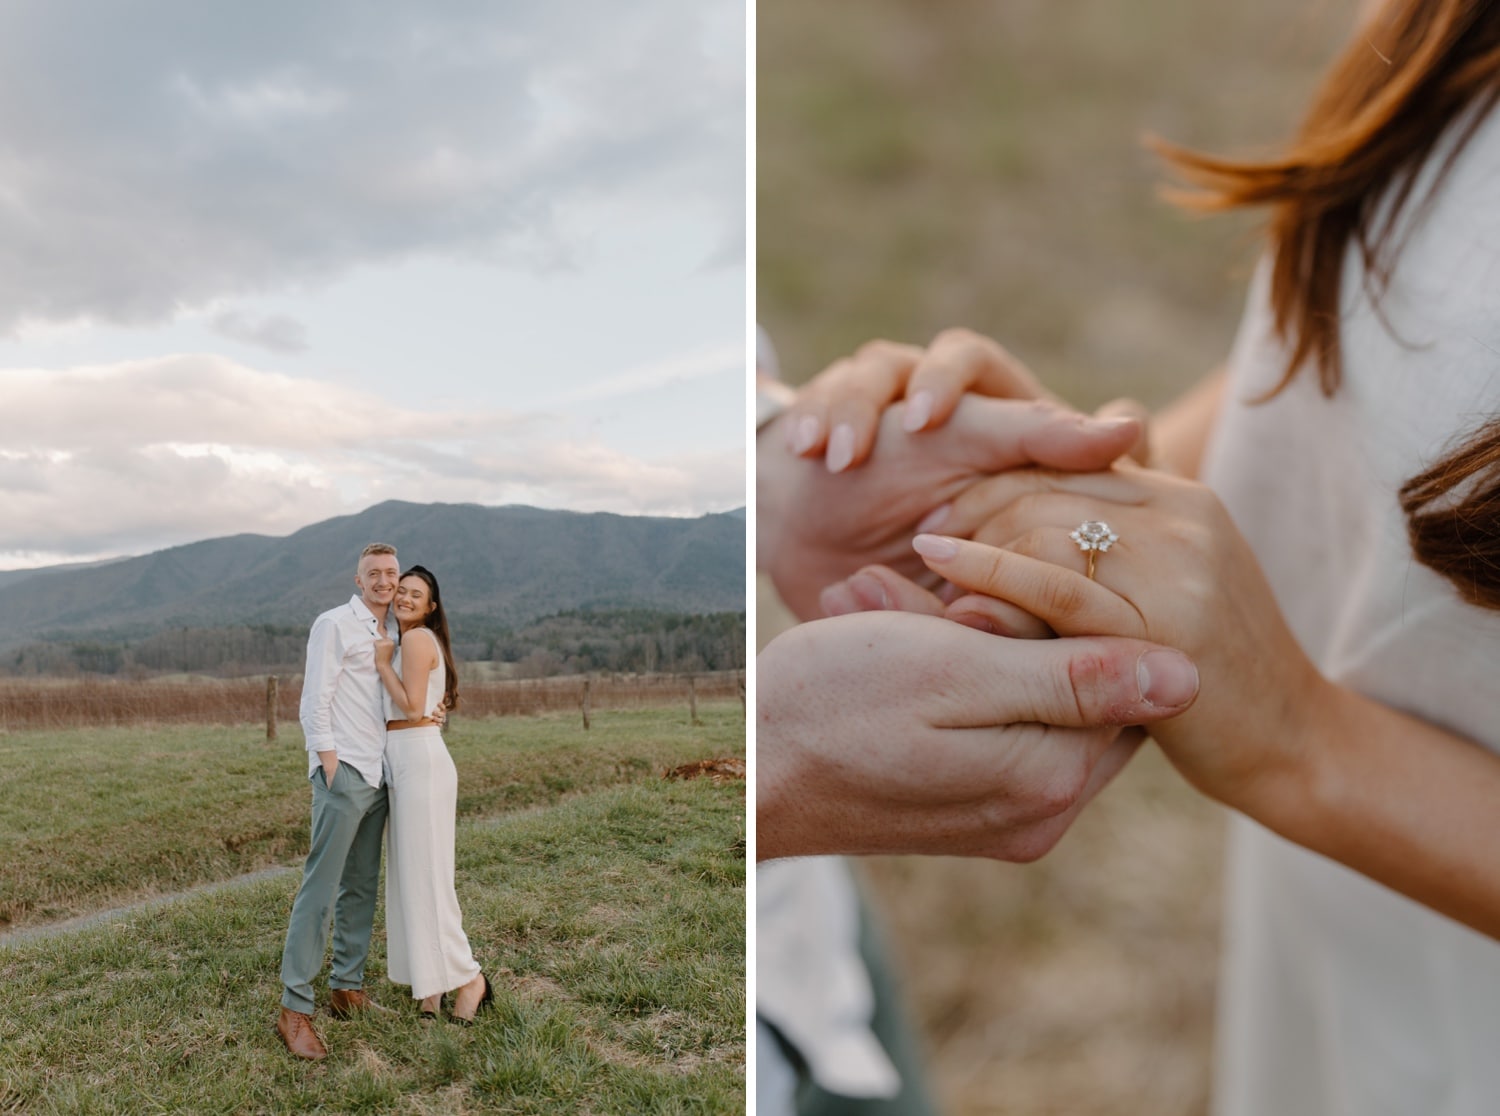 How To Propose In The Smoky Mountains Gatlinburg Engagement Photography Pigeon Forge Wears Valley Townsend